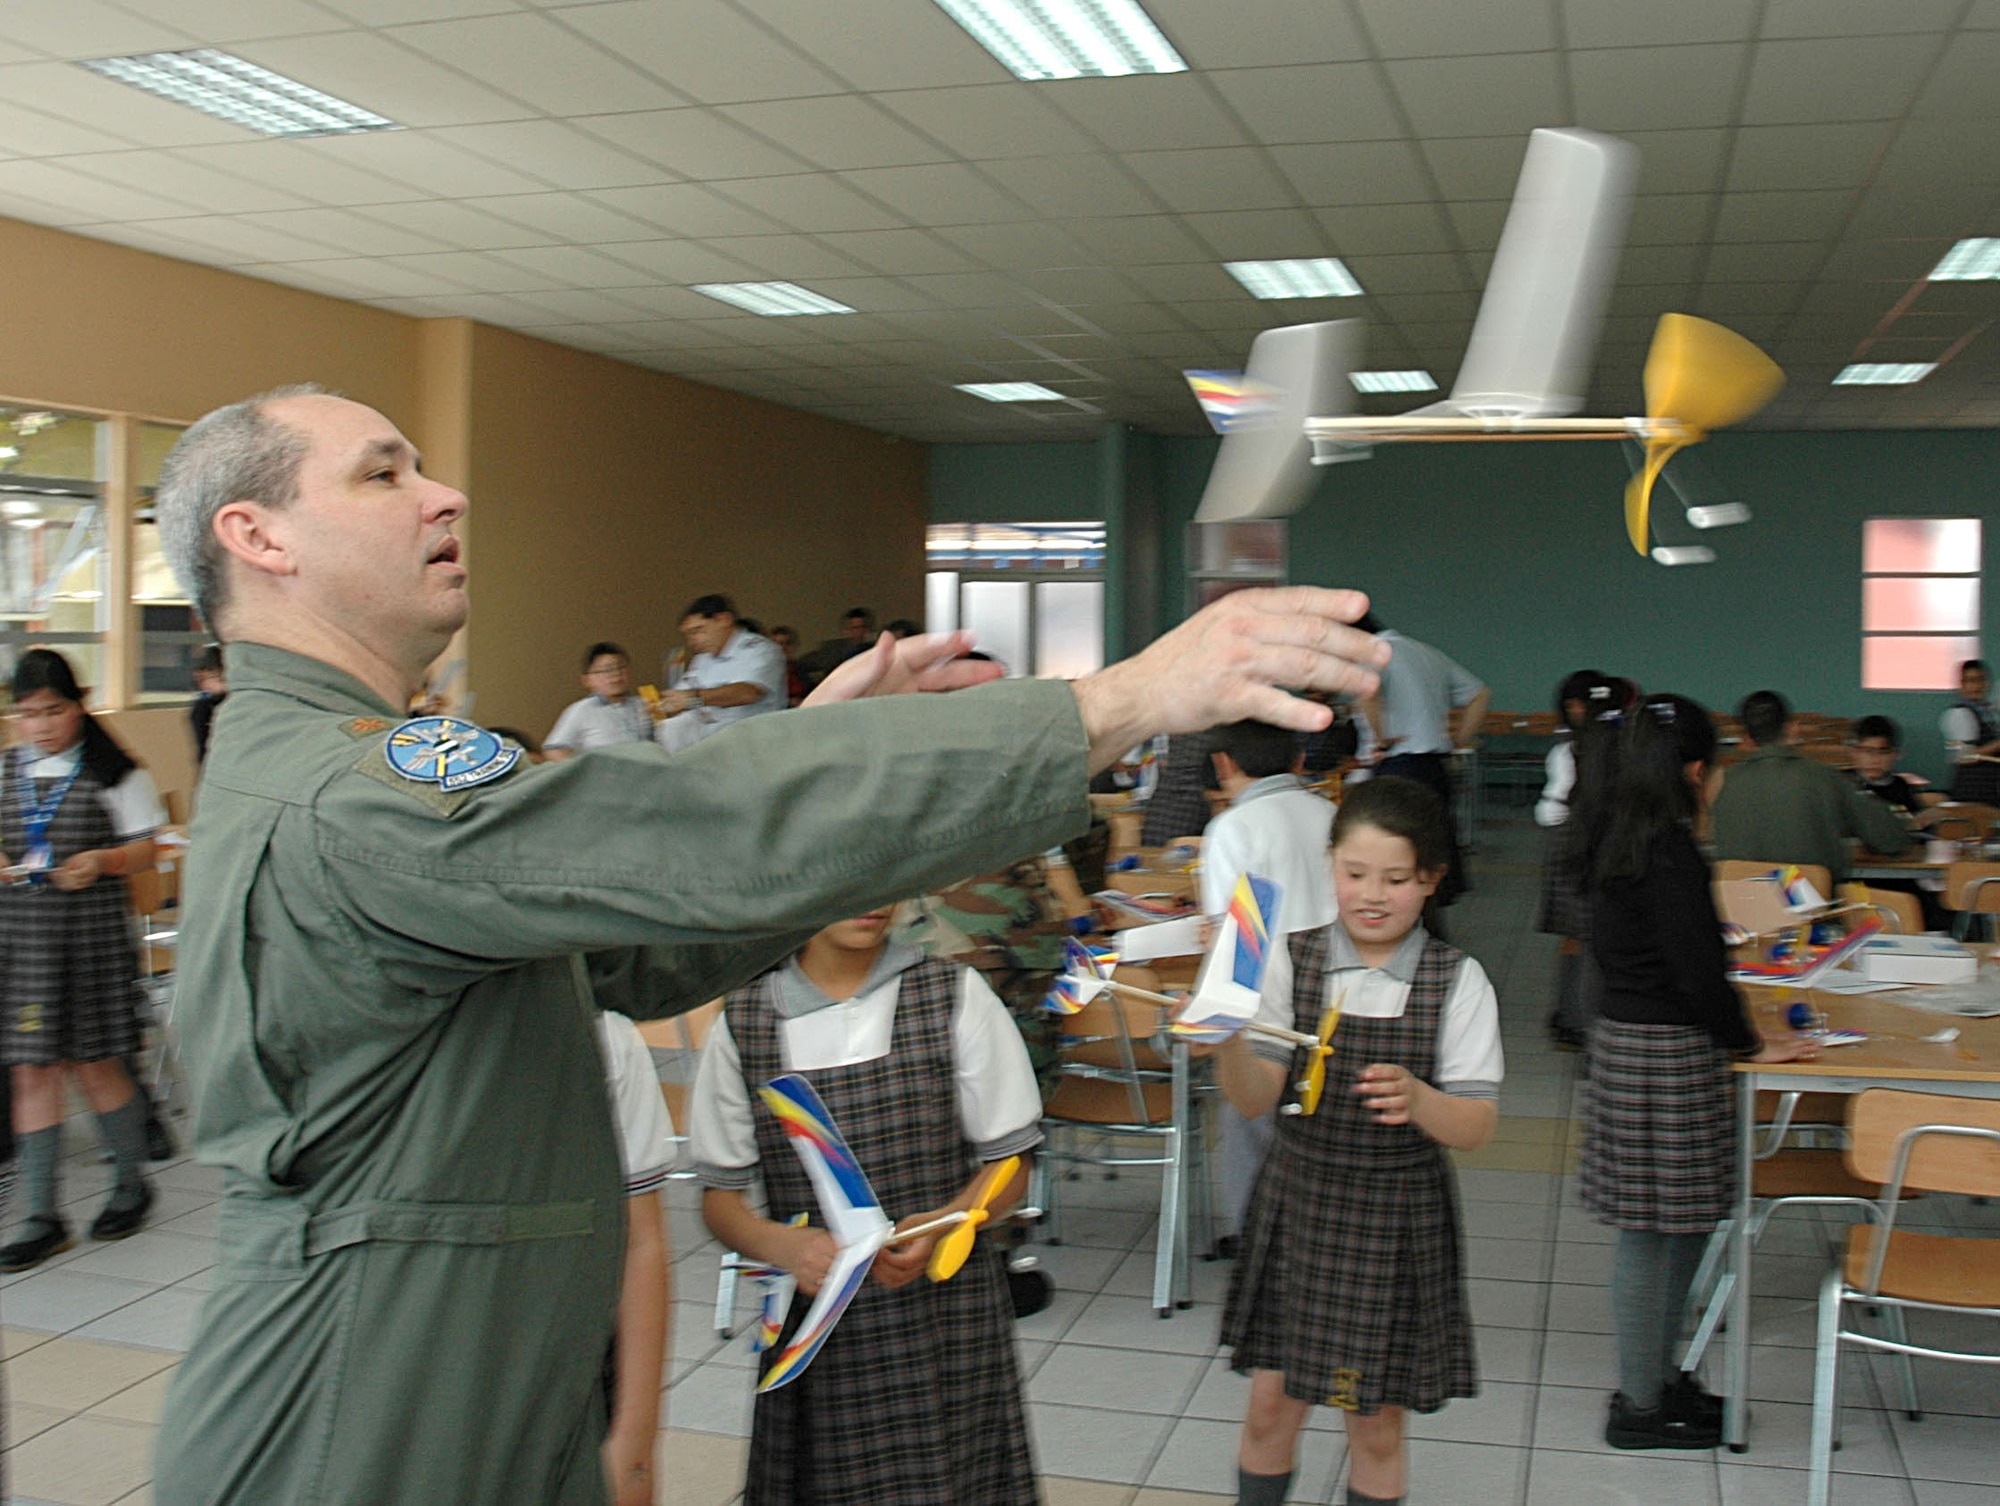 Maj. Mark Jones, operations officer for the U.S. Military Group in Chile, tests his model airplane Oct. 27 during a community outreach program at the Complejo Educacional Esperanza School in Santiago, Chile. Major Jones volunteered alongside members of Air Forces Southern, Chilean air force, the U.S. Embassy, and civilian volunteers from a U.S. based technology firm. Agilent Technologies donated dozens of afterschool activities including the model aircraft to demonstrate the practical applications of science during planned community outreach events. The volunteer opportunity marked the beginning of Operation Southern Partner, an all-new program featuring more than 70 U.S. Air Force subject matter experts from about 25 career fields working alongside partner nation military members in similar career specialties during week-long exchanges. (U.S. Embassy photo/Jose Nuños)